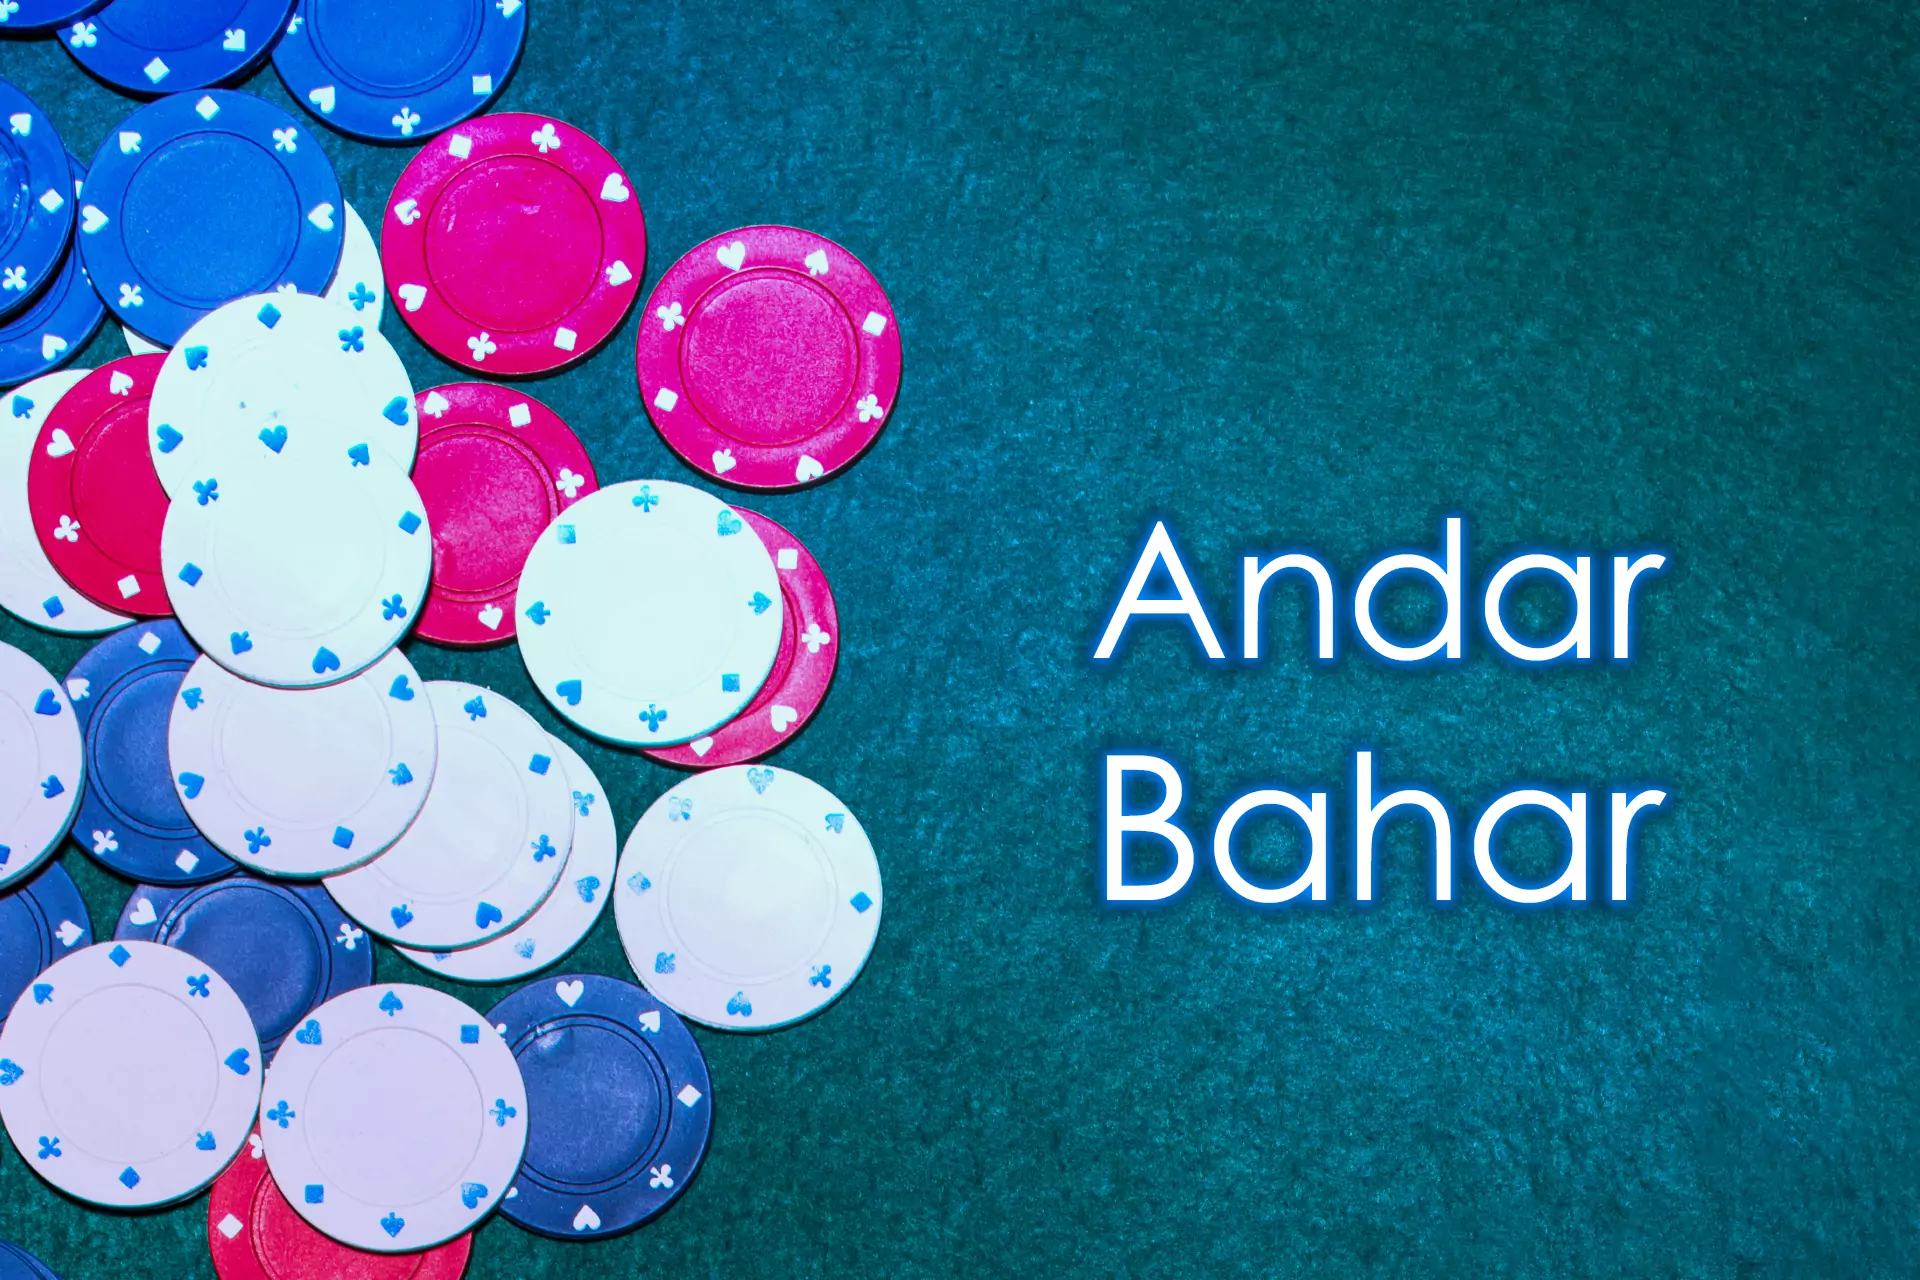 In Andar Bahar users play against casino and make bets on one of two events.